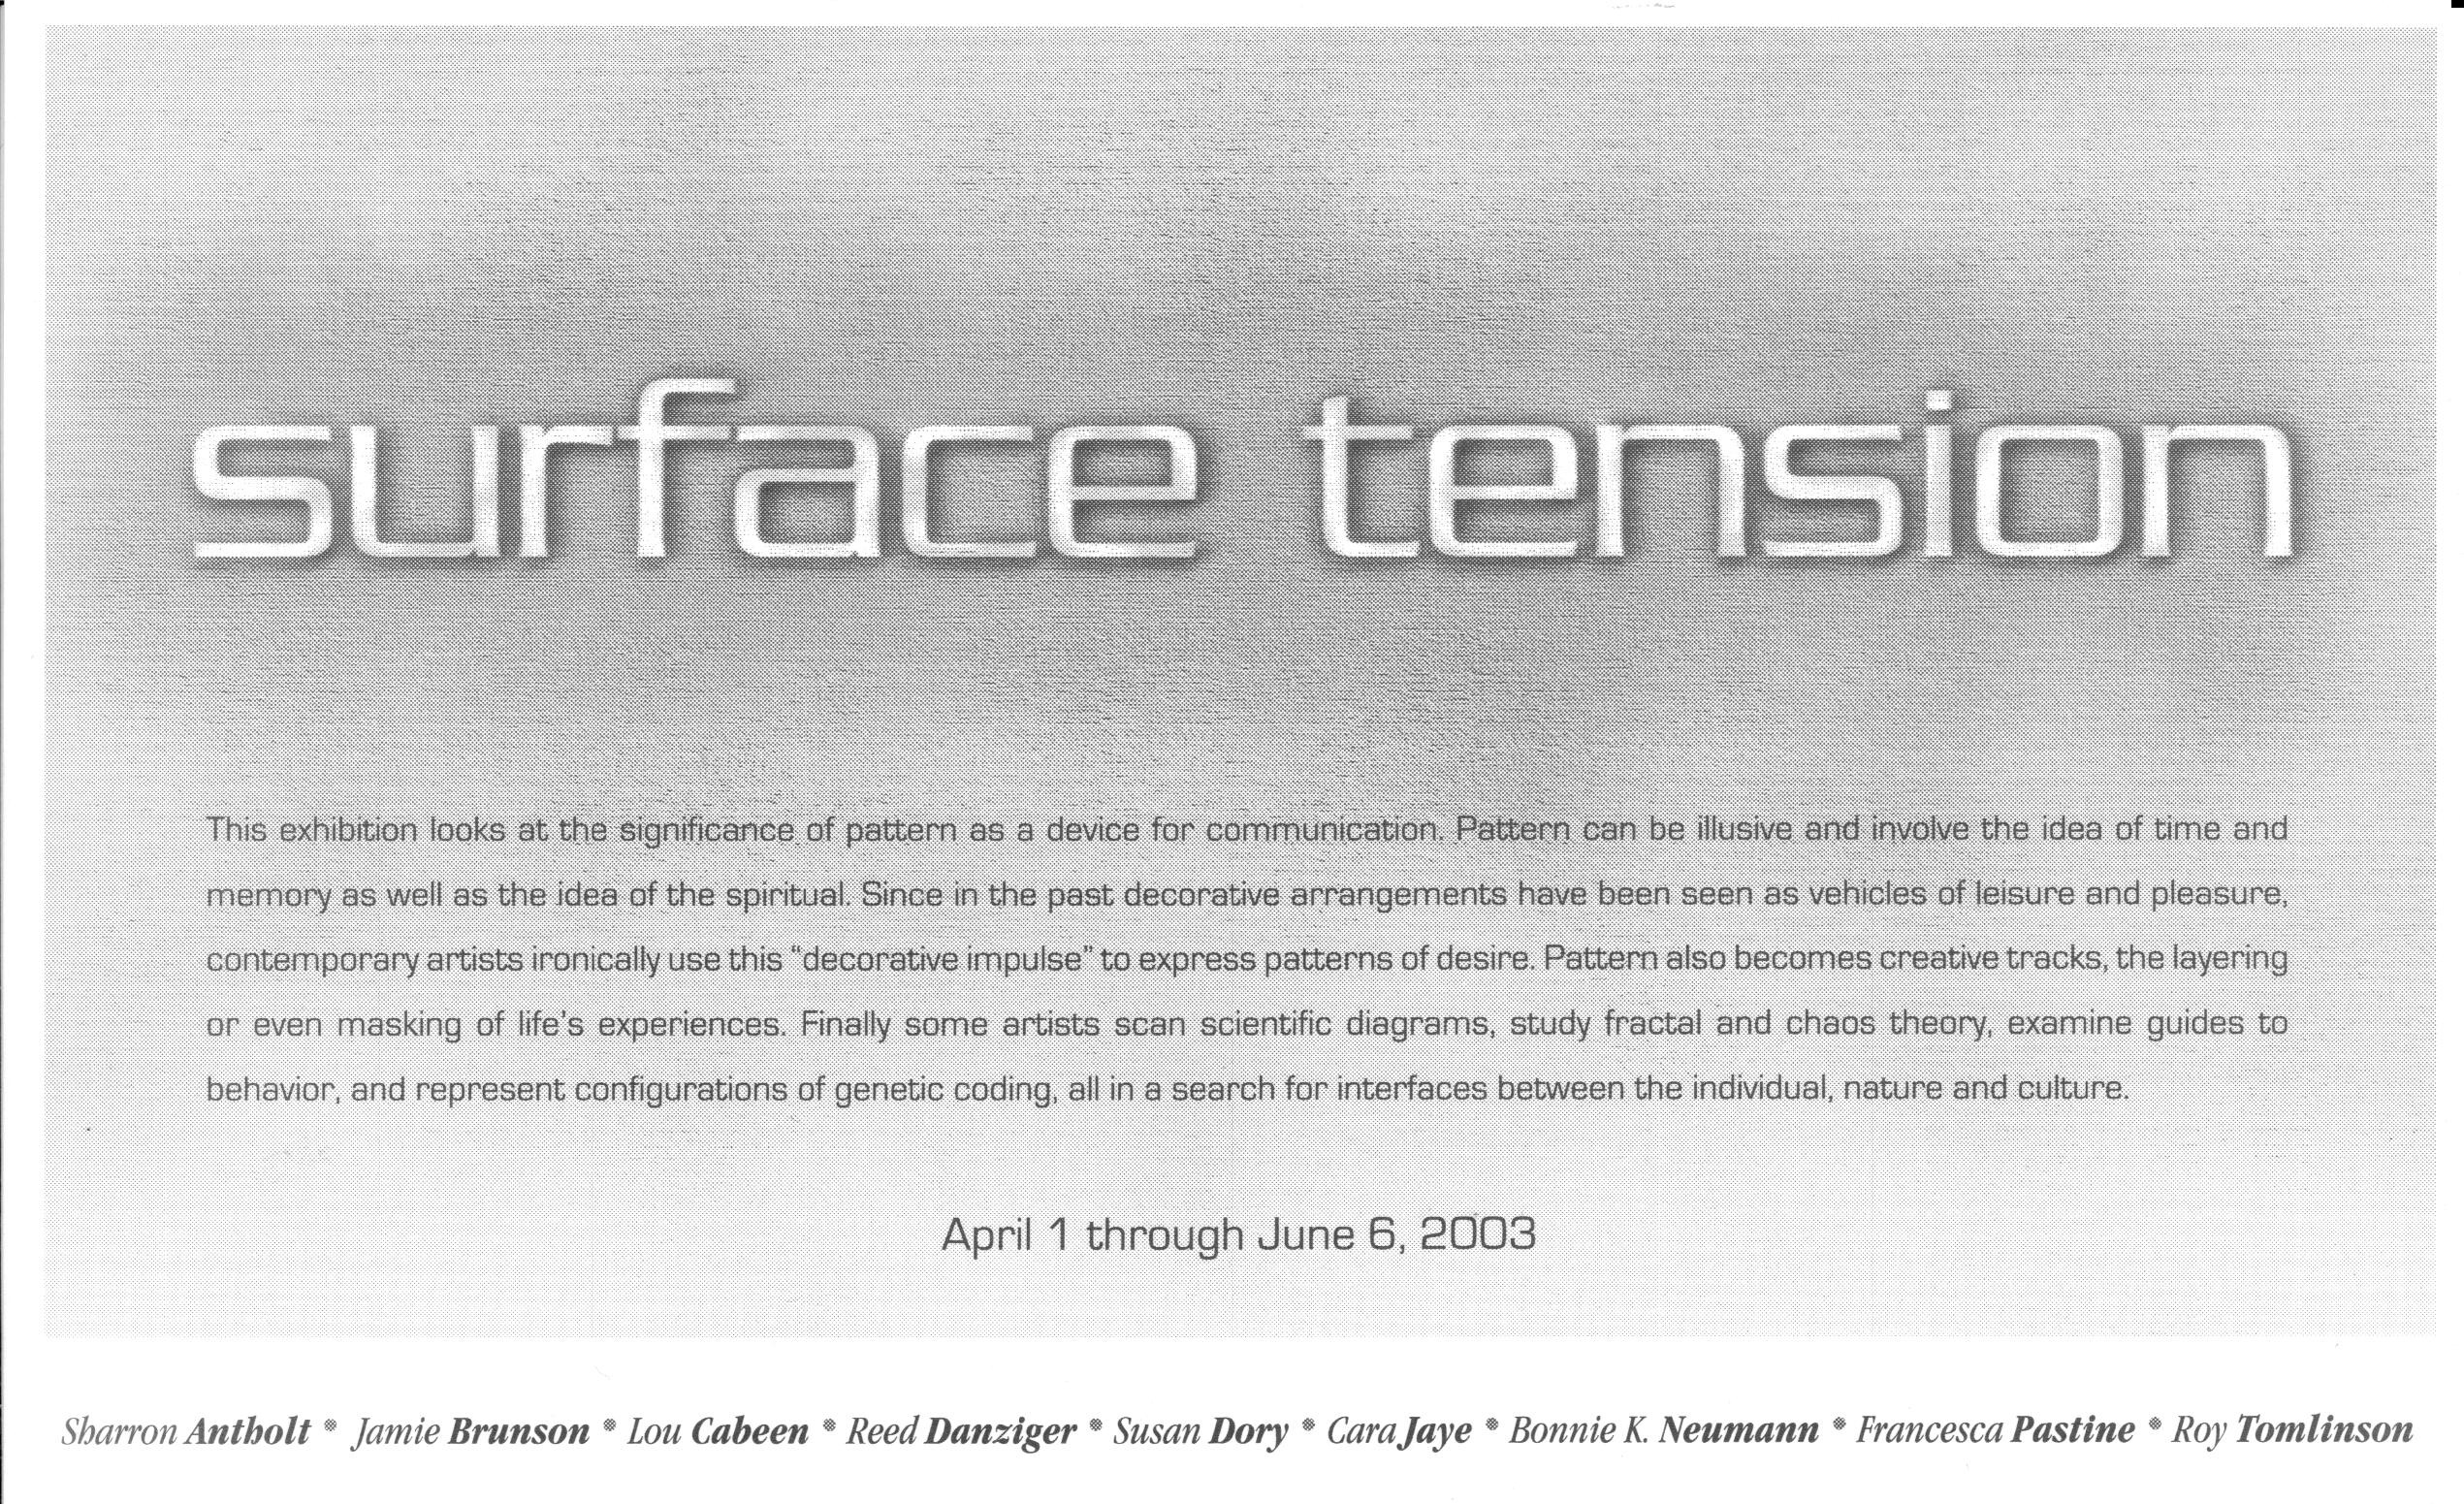 Surface Tension in large font with a minimal exhibition description beneath. 